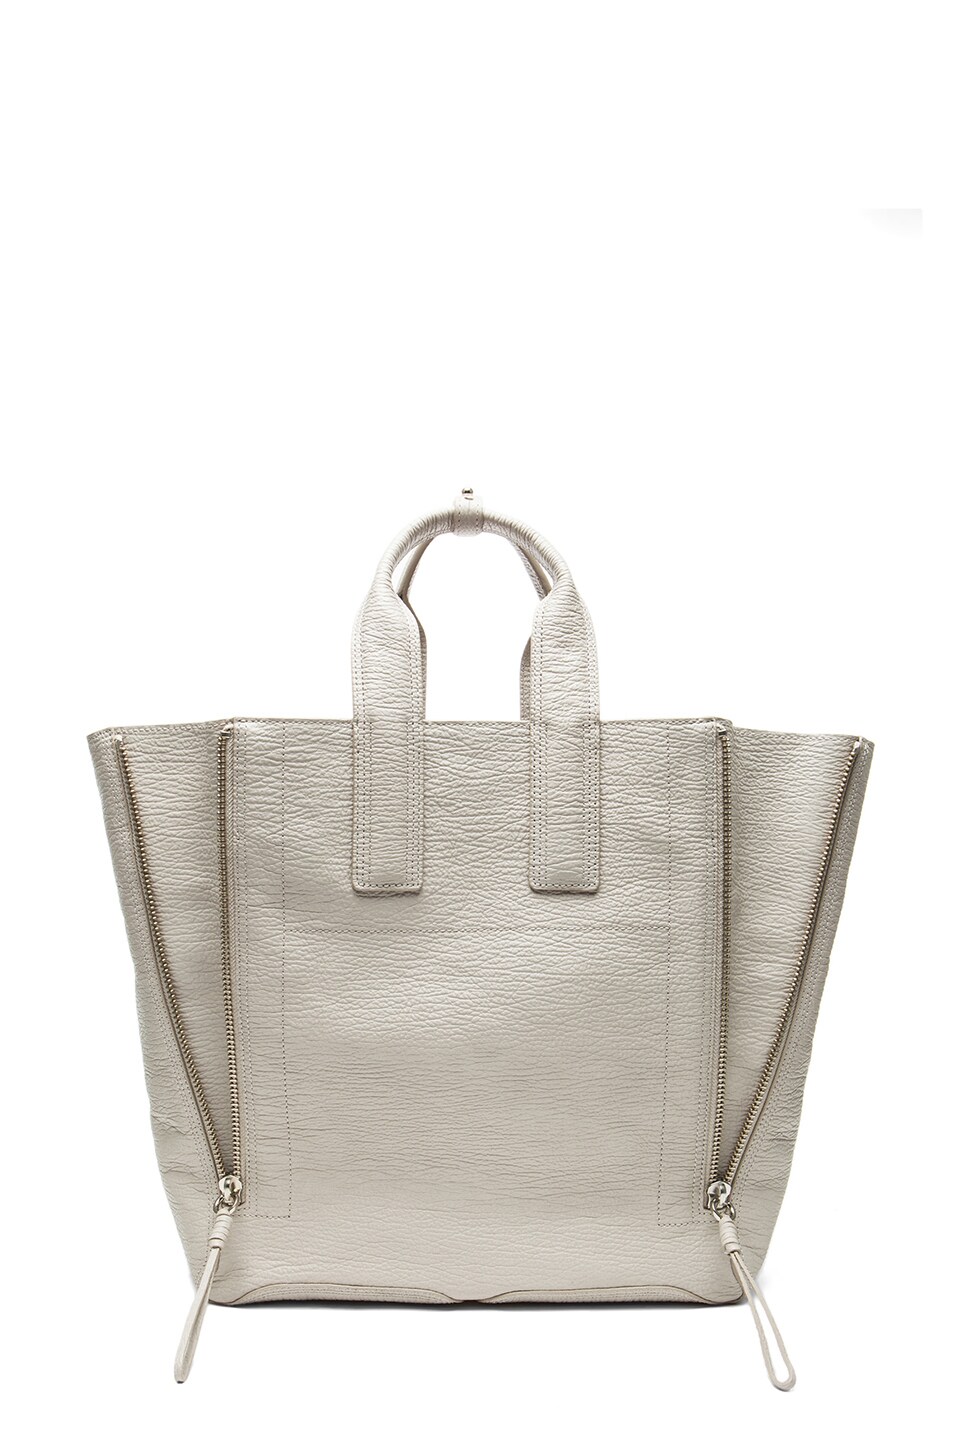 Image 1 of 3.1 phillip lim Large Pashli Tote in Feather